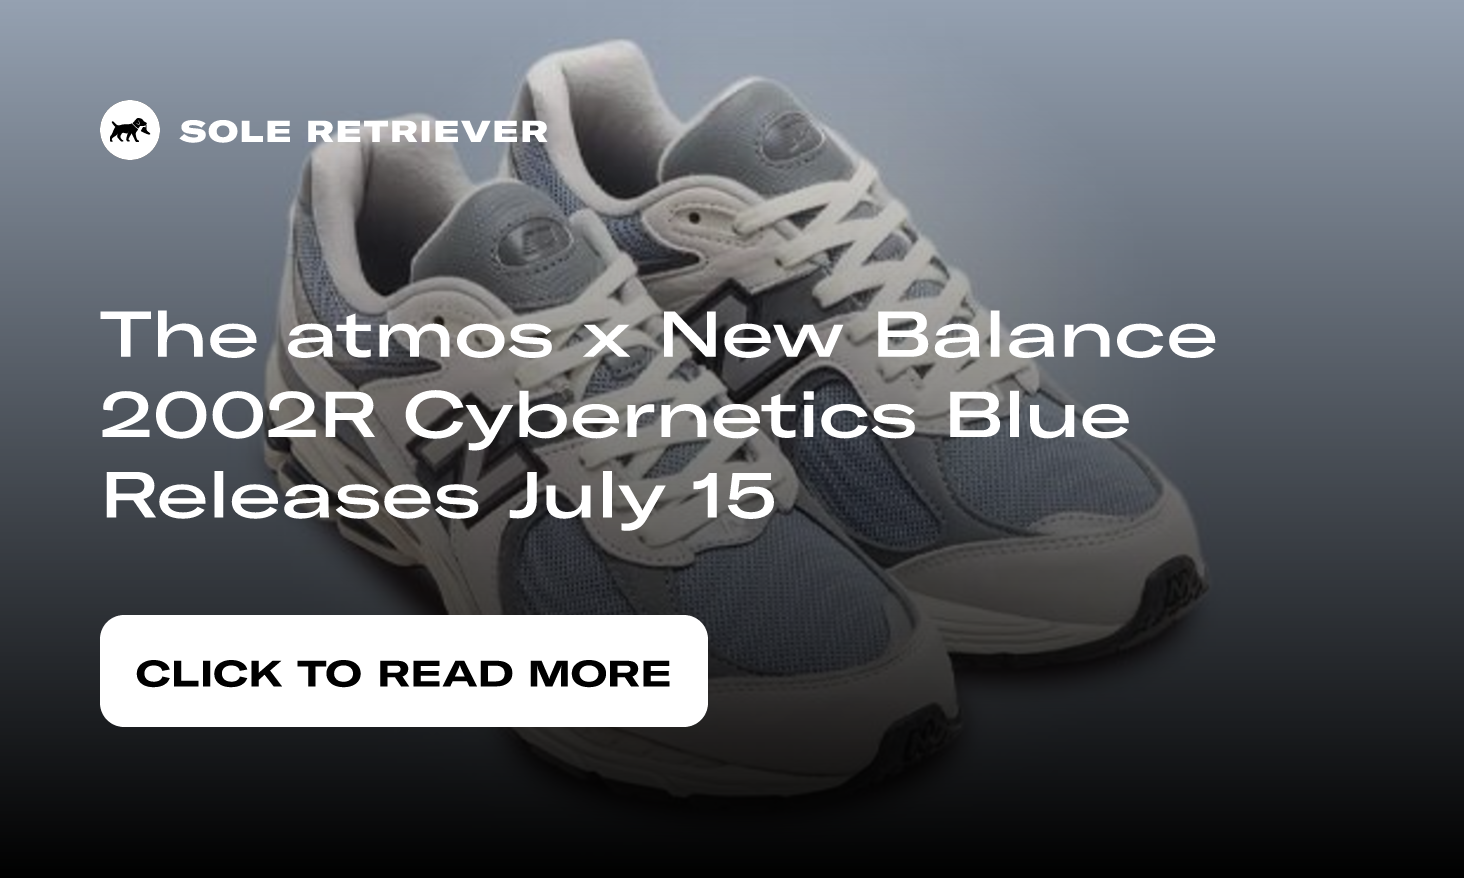 The atmos x New Balance 2002R Cybernetics Blue Releases July 15